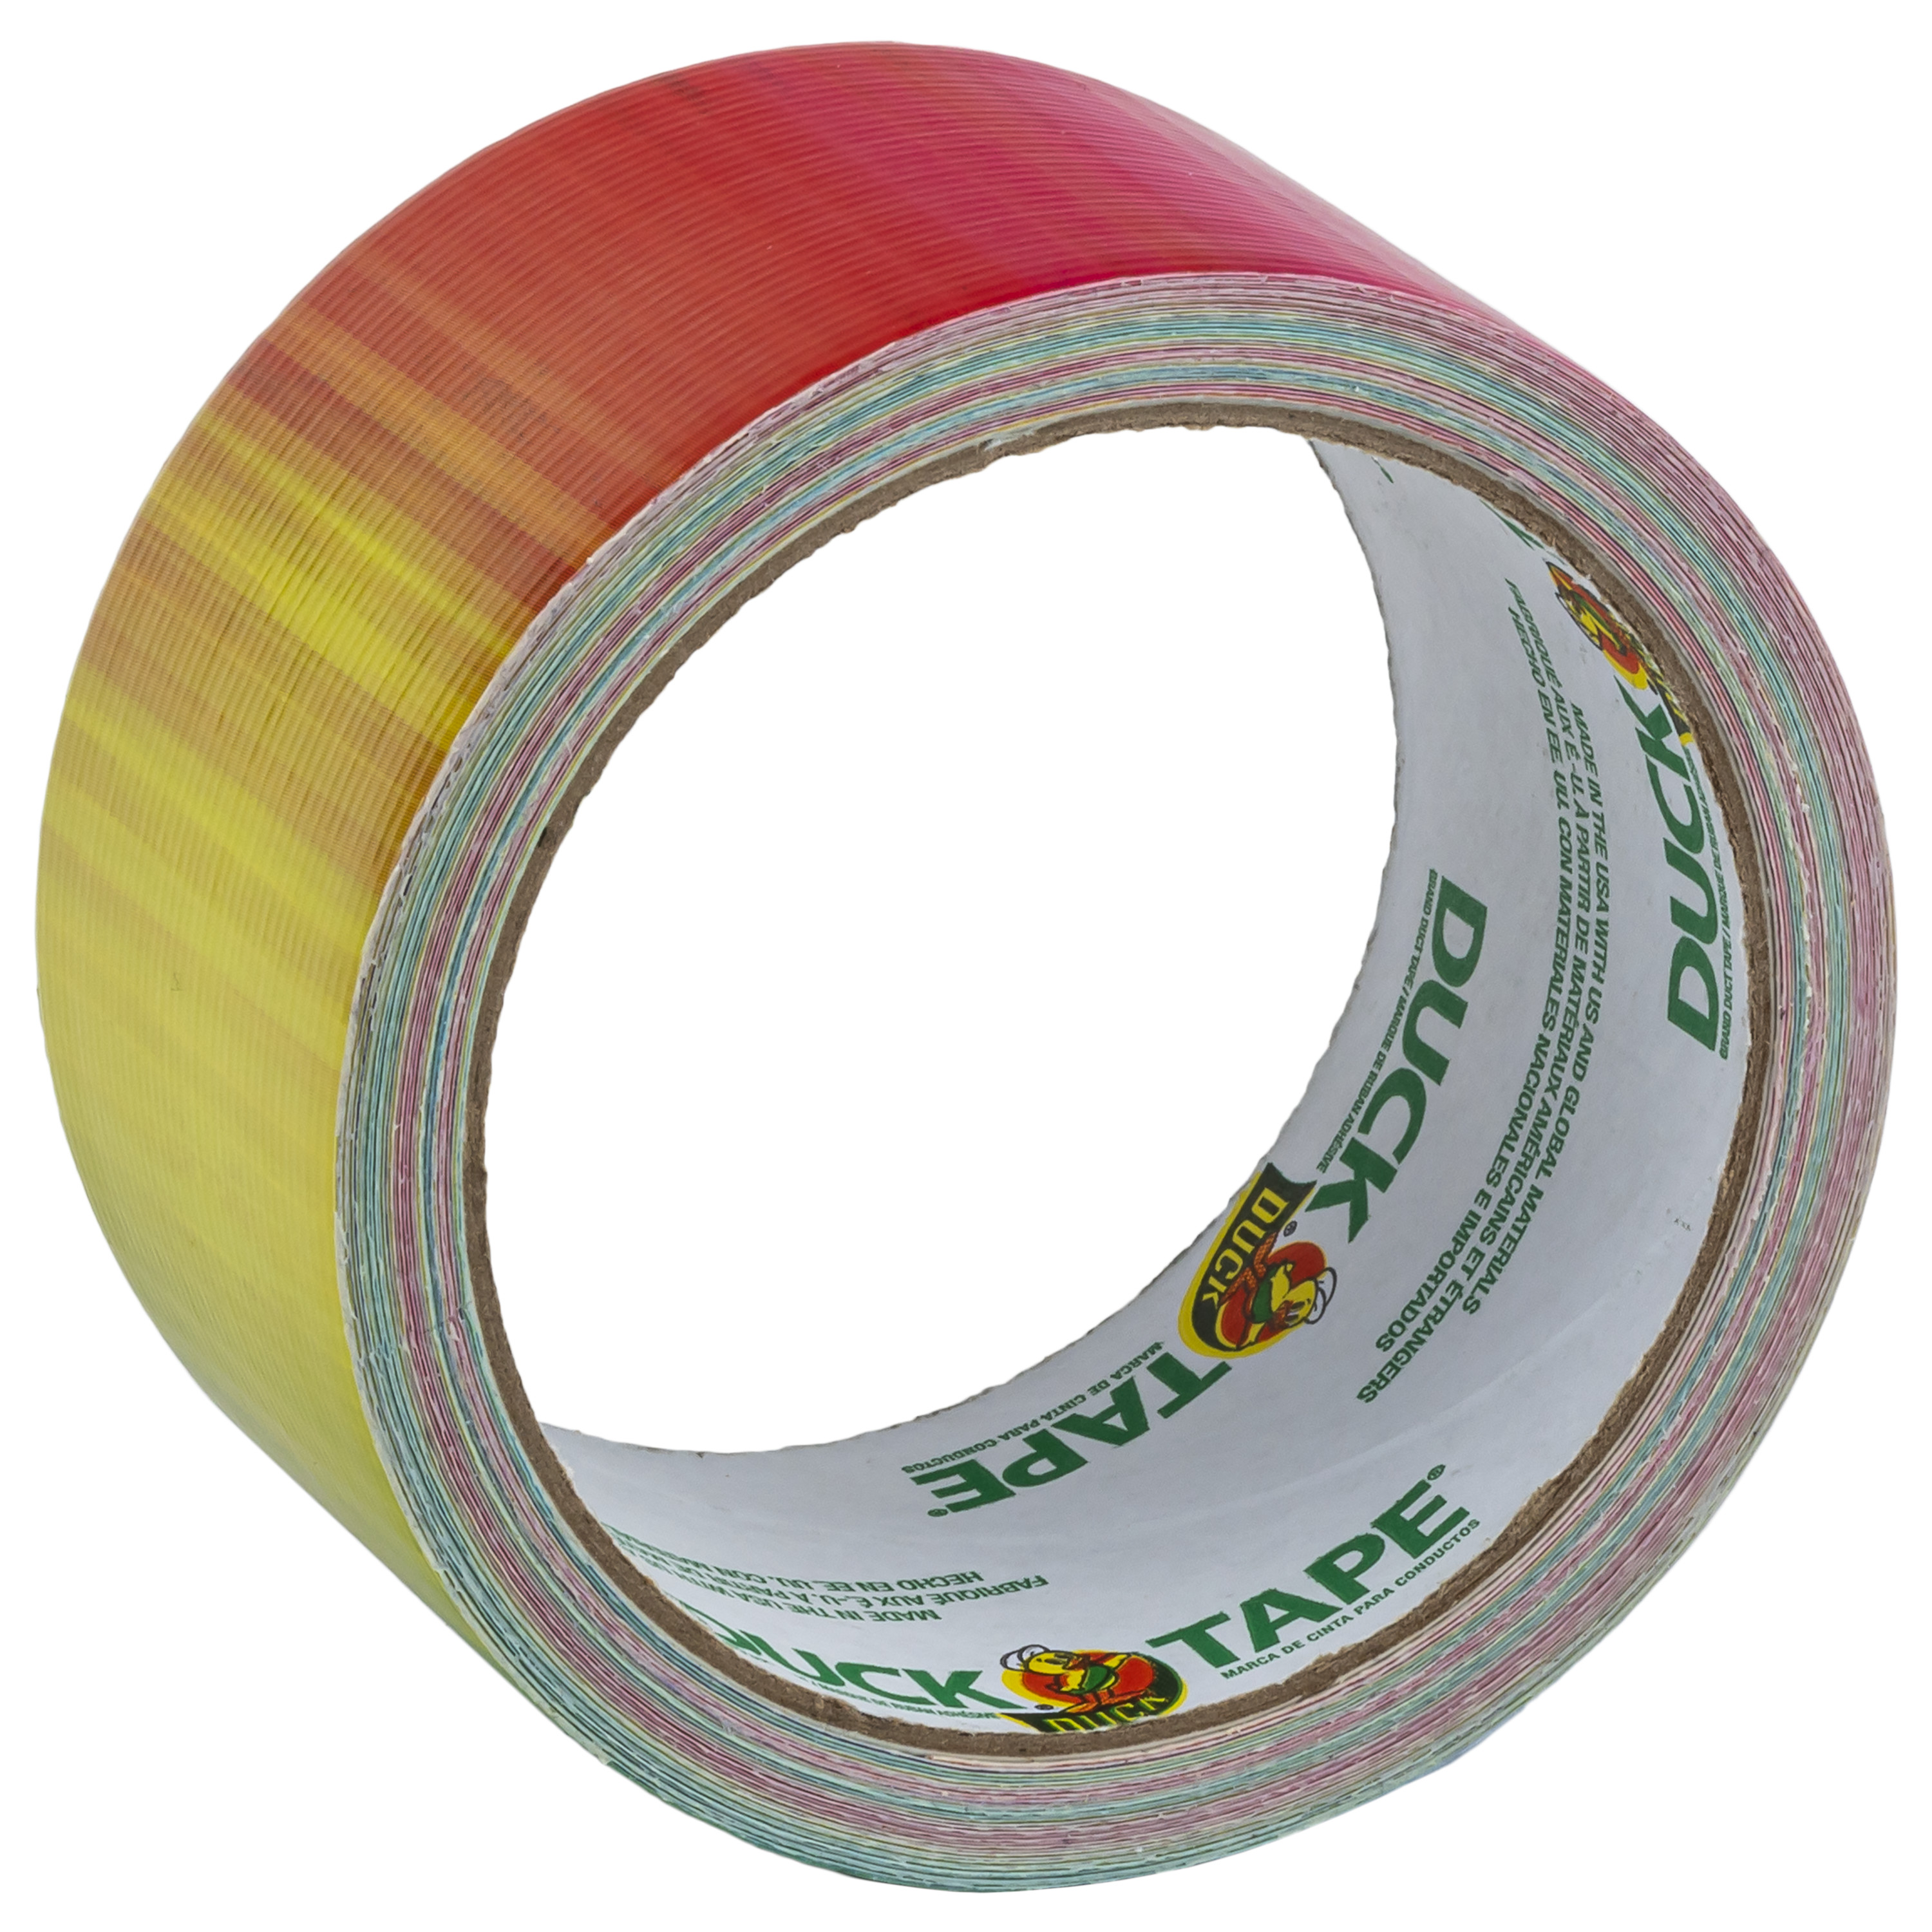 Printed Duck Tape Brand Duct Tape - Ombre Rainbow 10 Yards - image 5 of 8